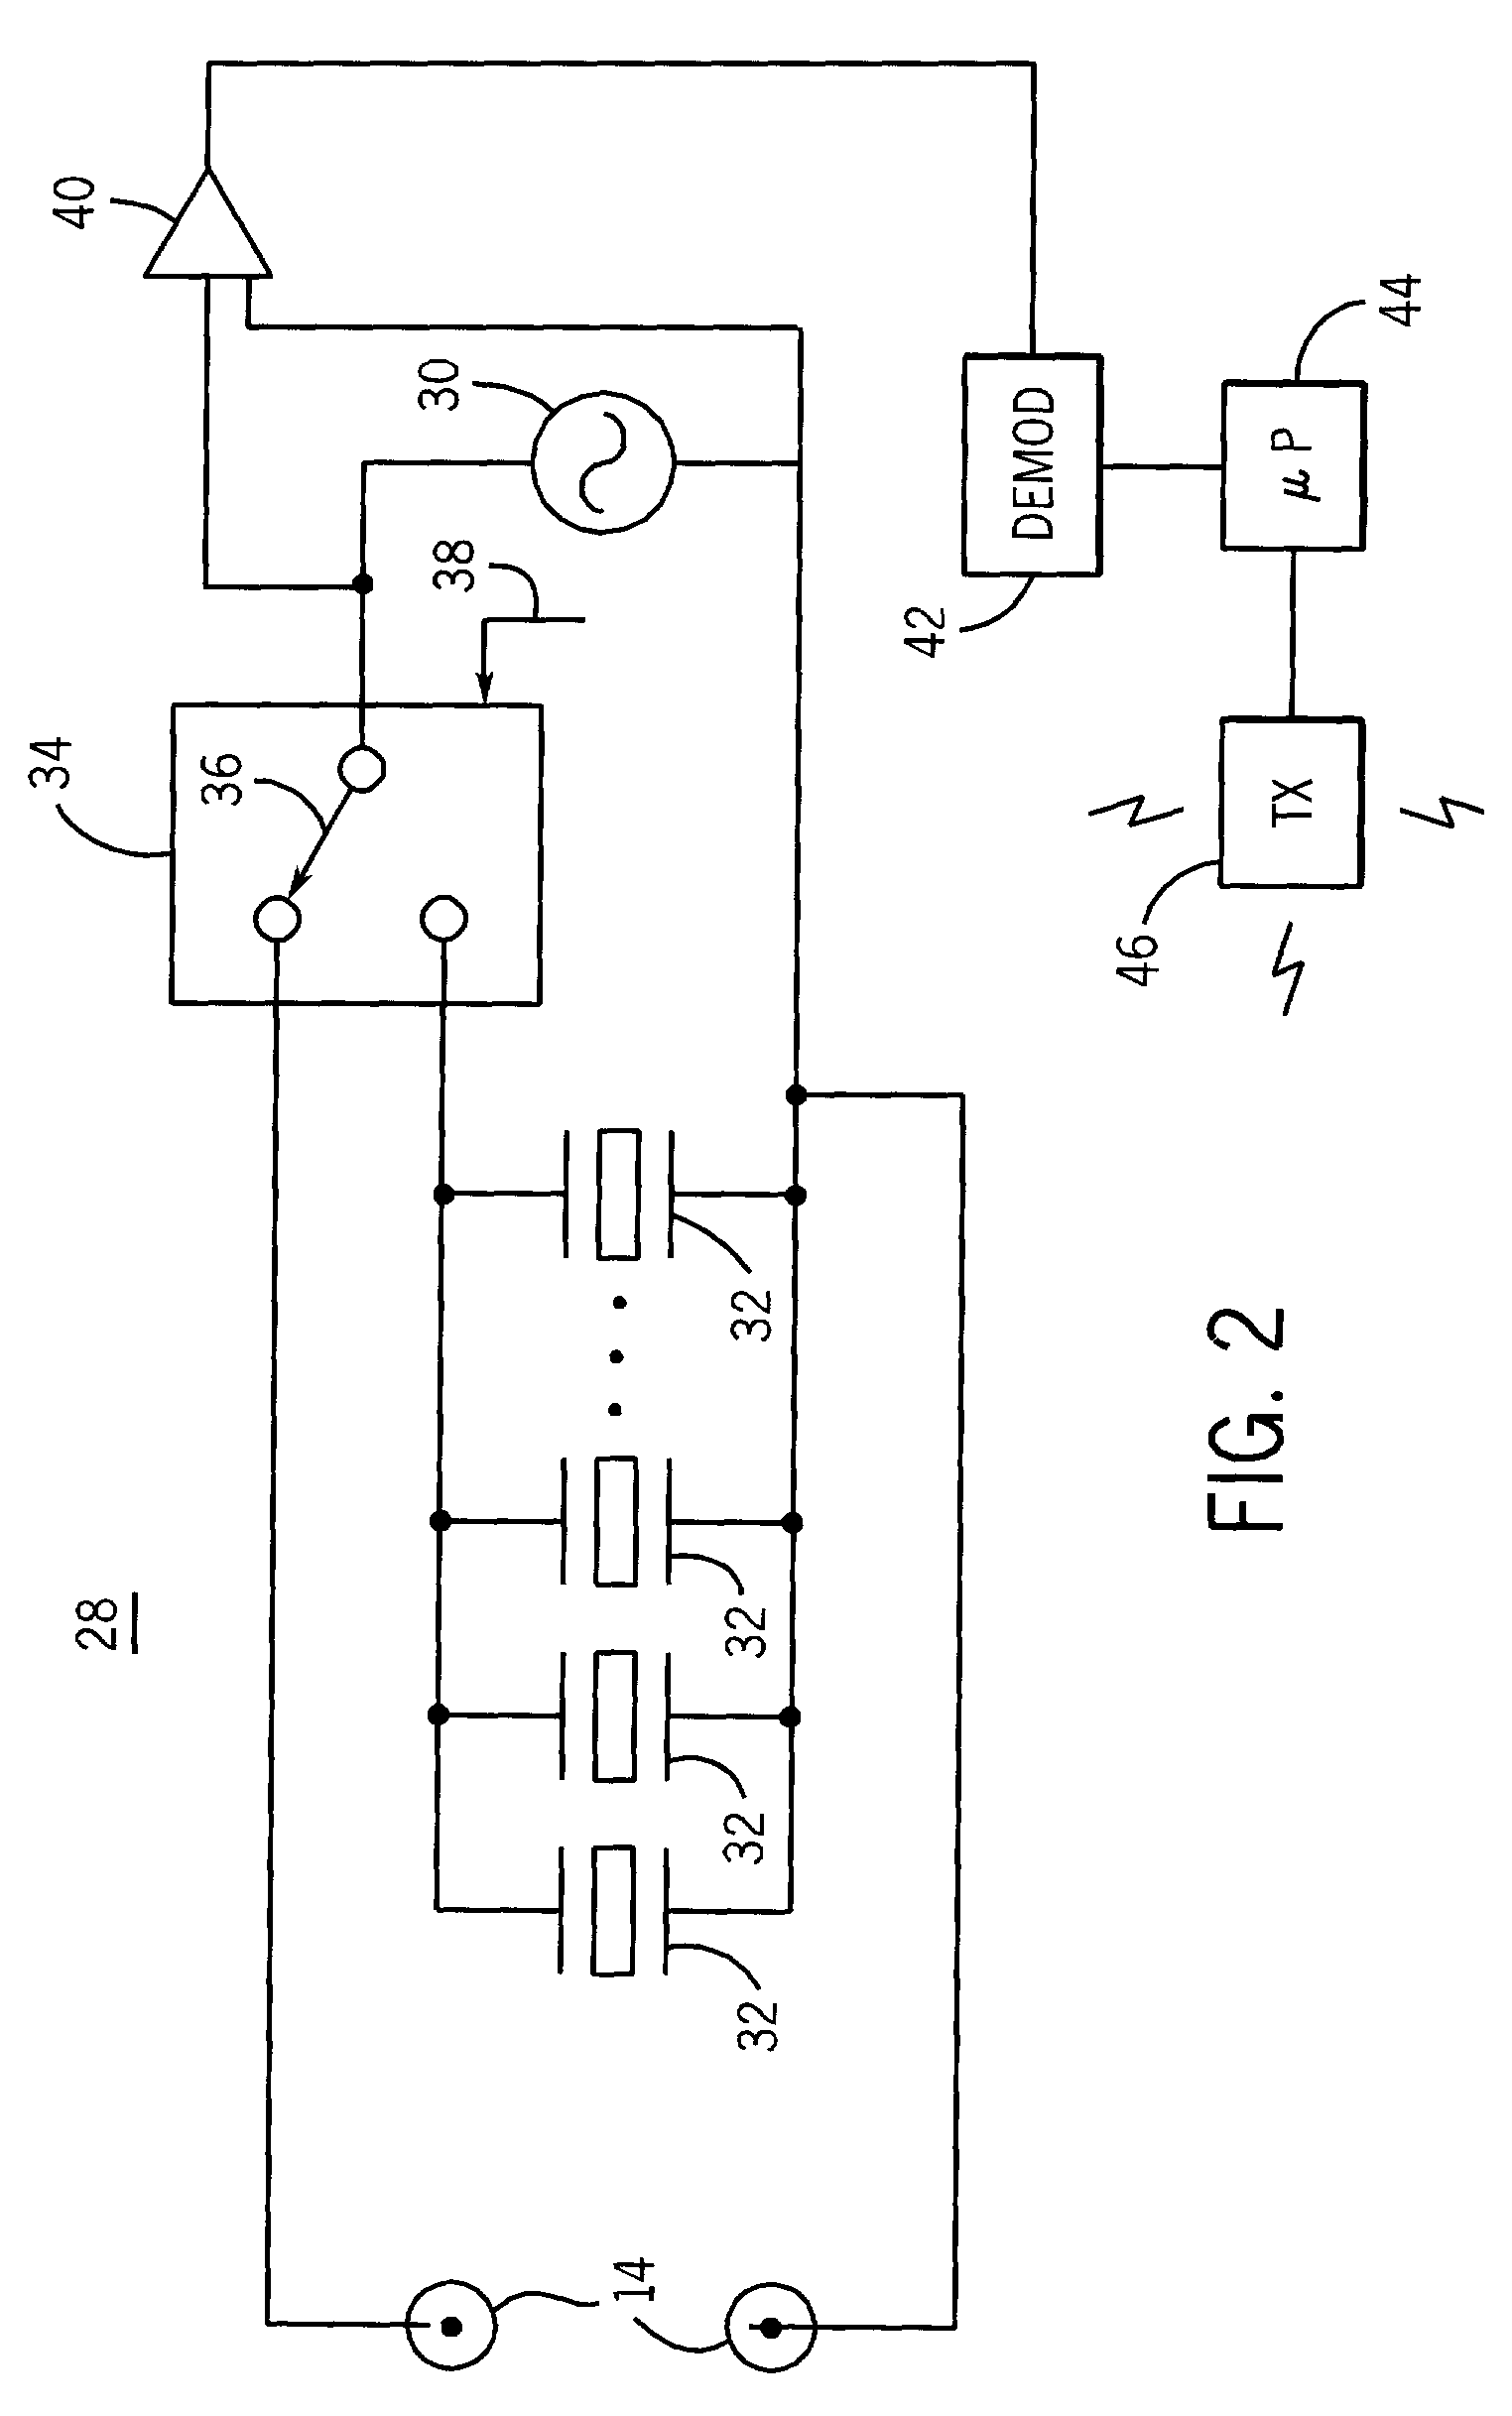 Combined uterine activity and fetal heart rate monitoring device